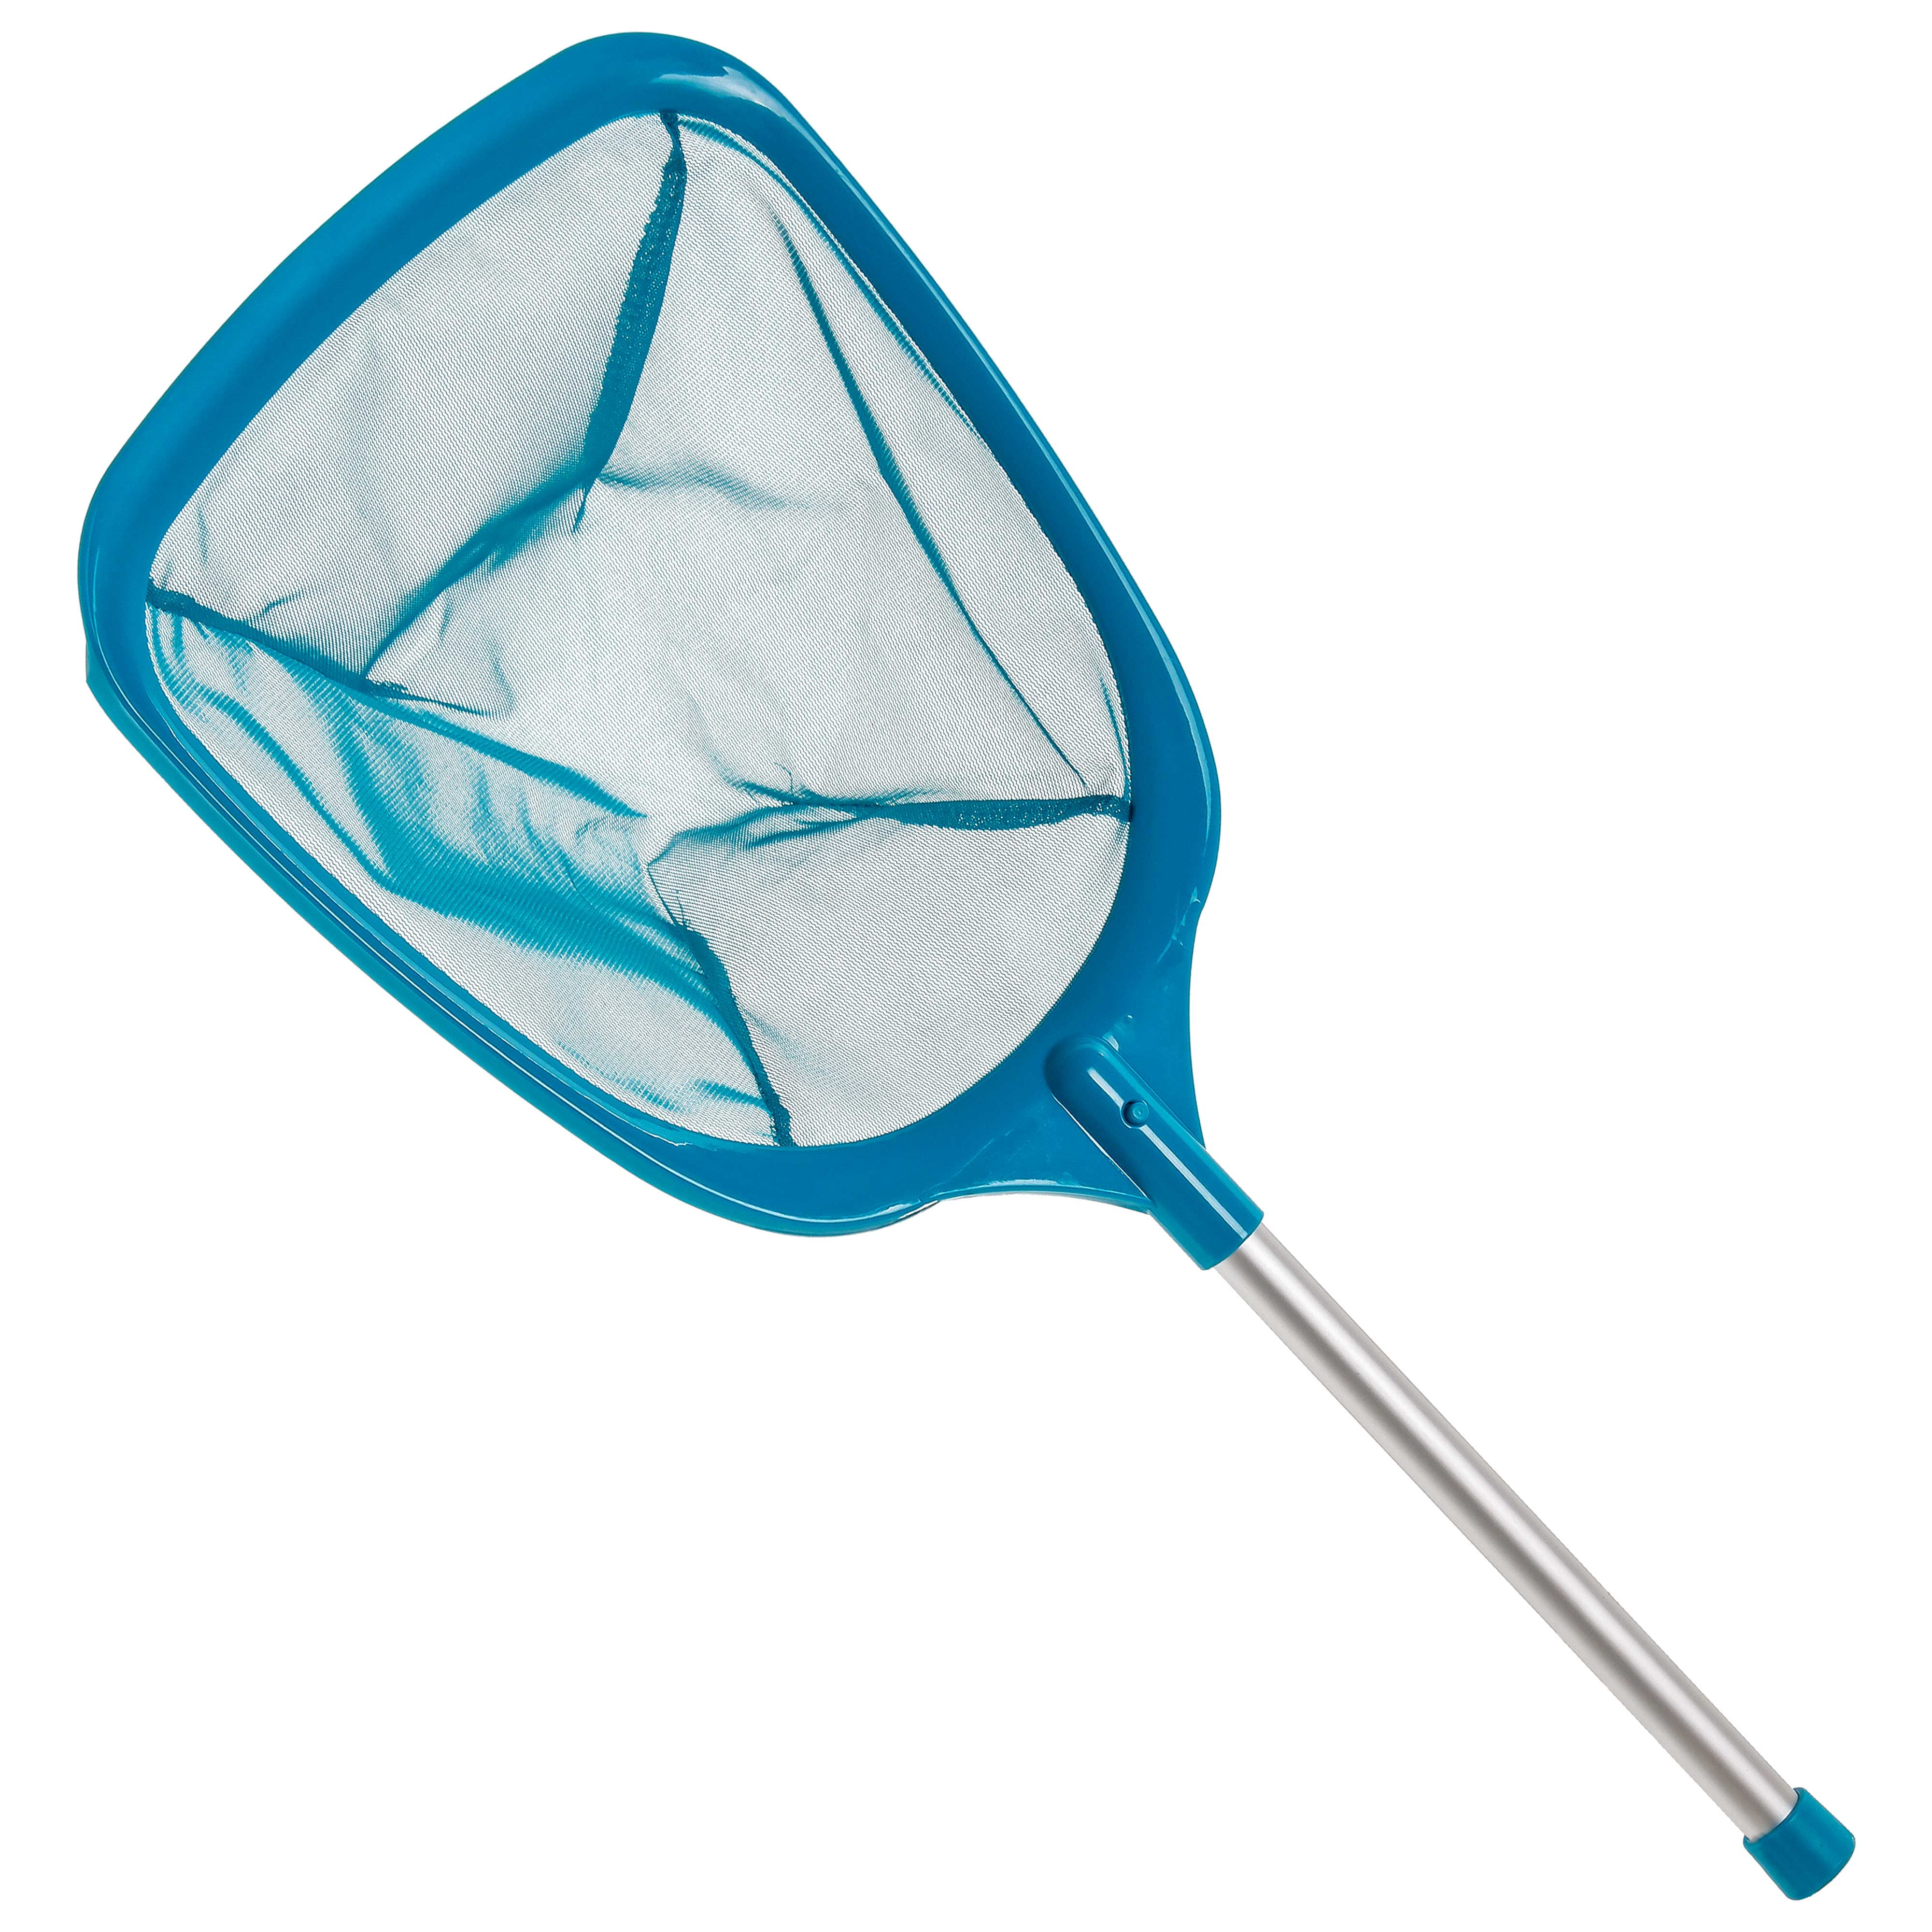 Hot Tub USA SPA iMeshbean Spa Skimmer Net Pool Leaf Skimmer Hand Skimmer Net with Handle and Magnet for Swimming Pool